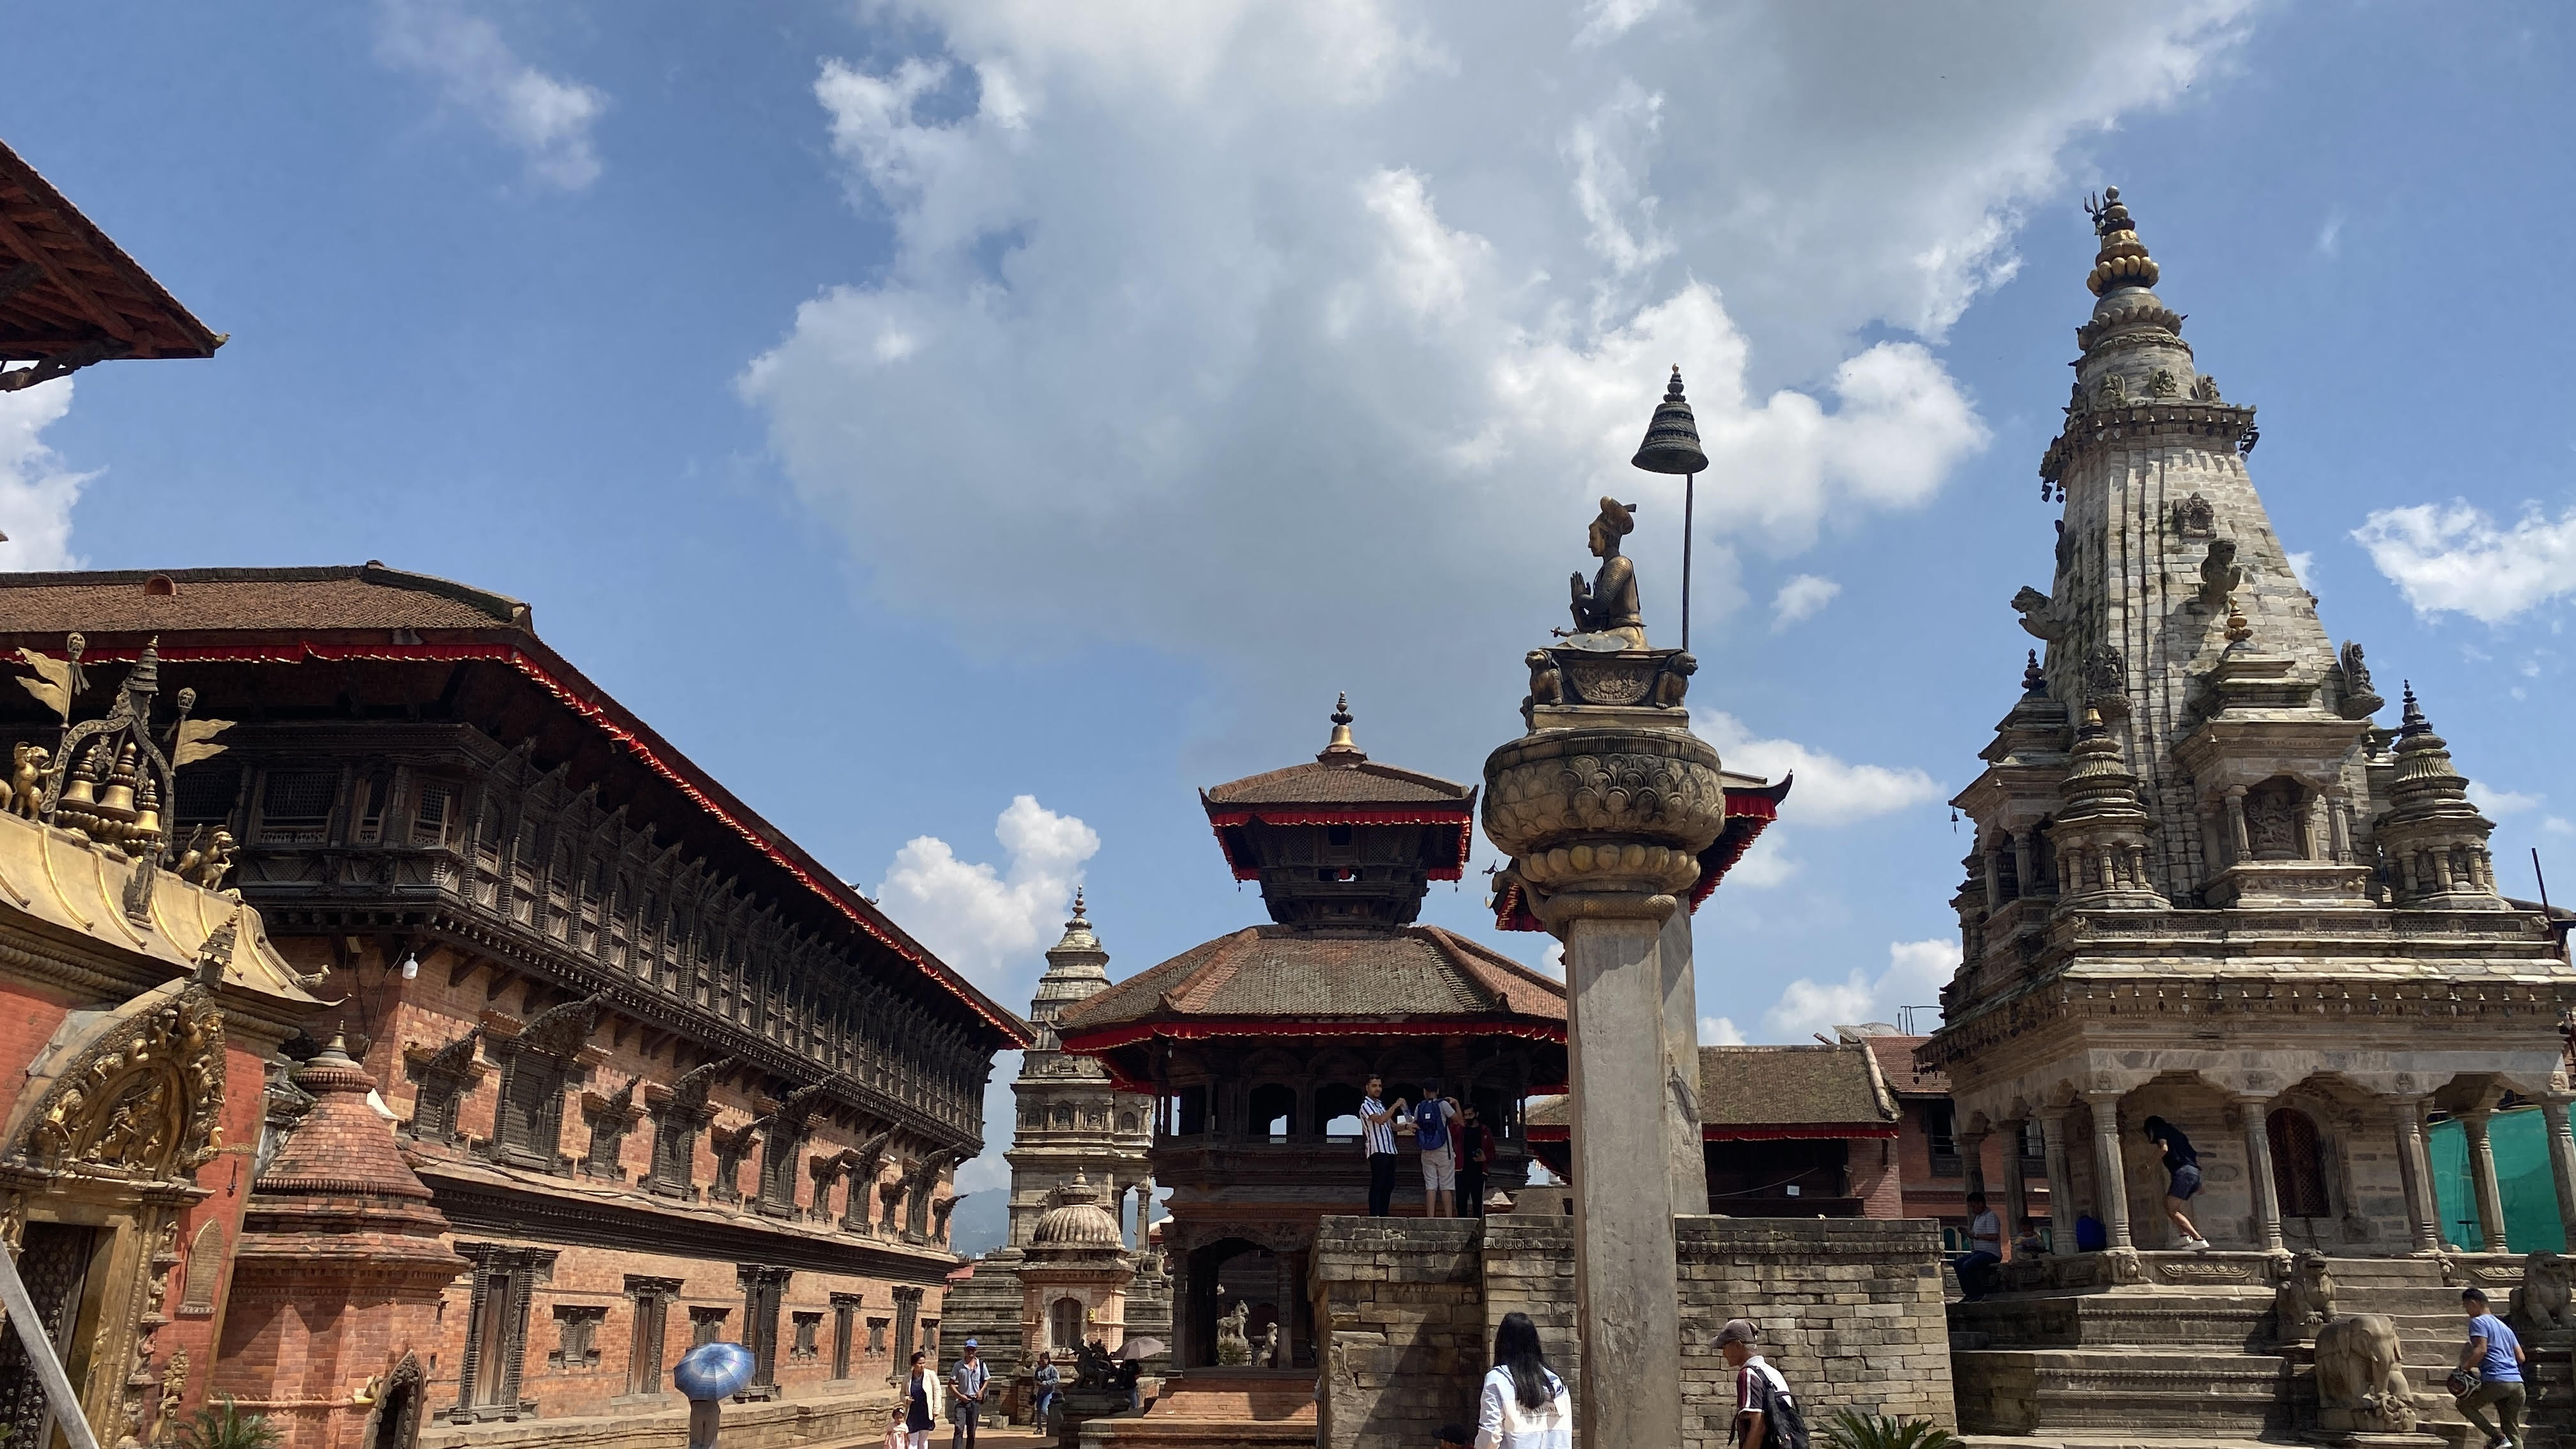 Bhaktapur Durbar Square from the Western gate